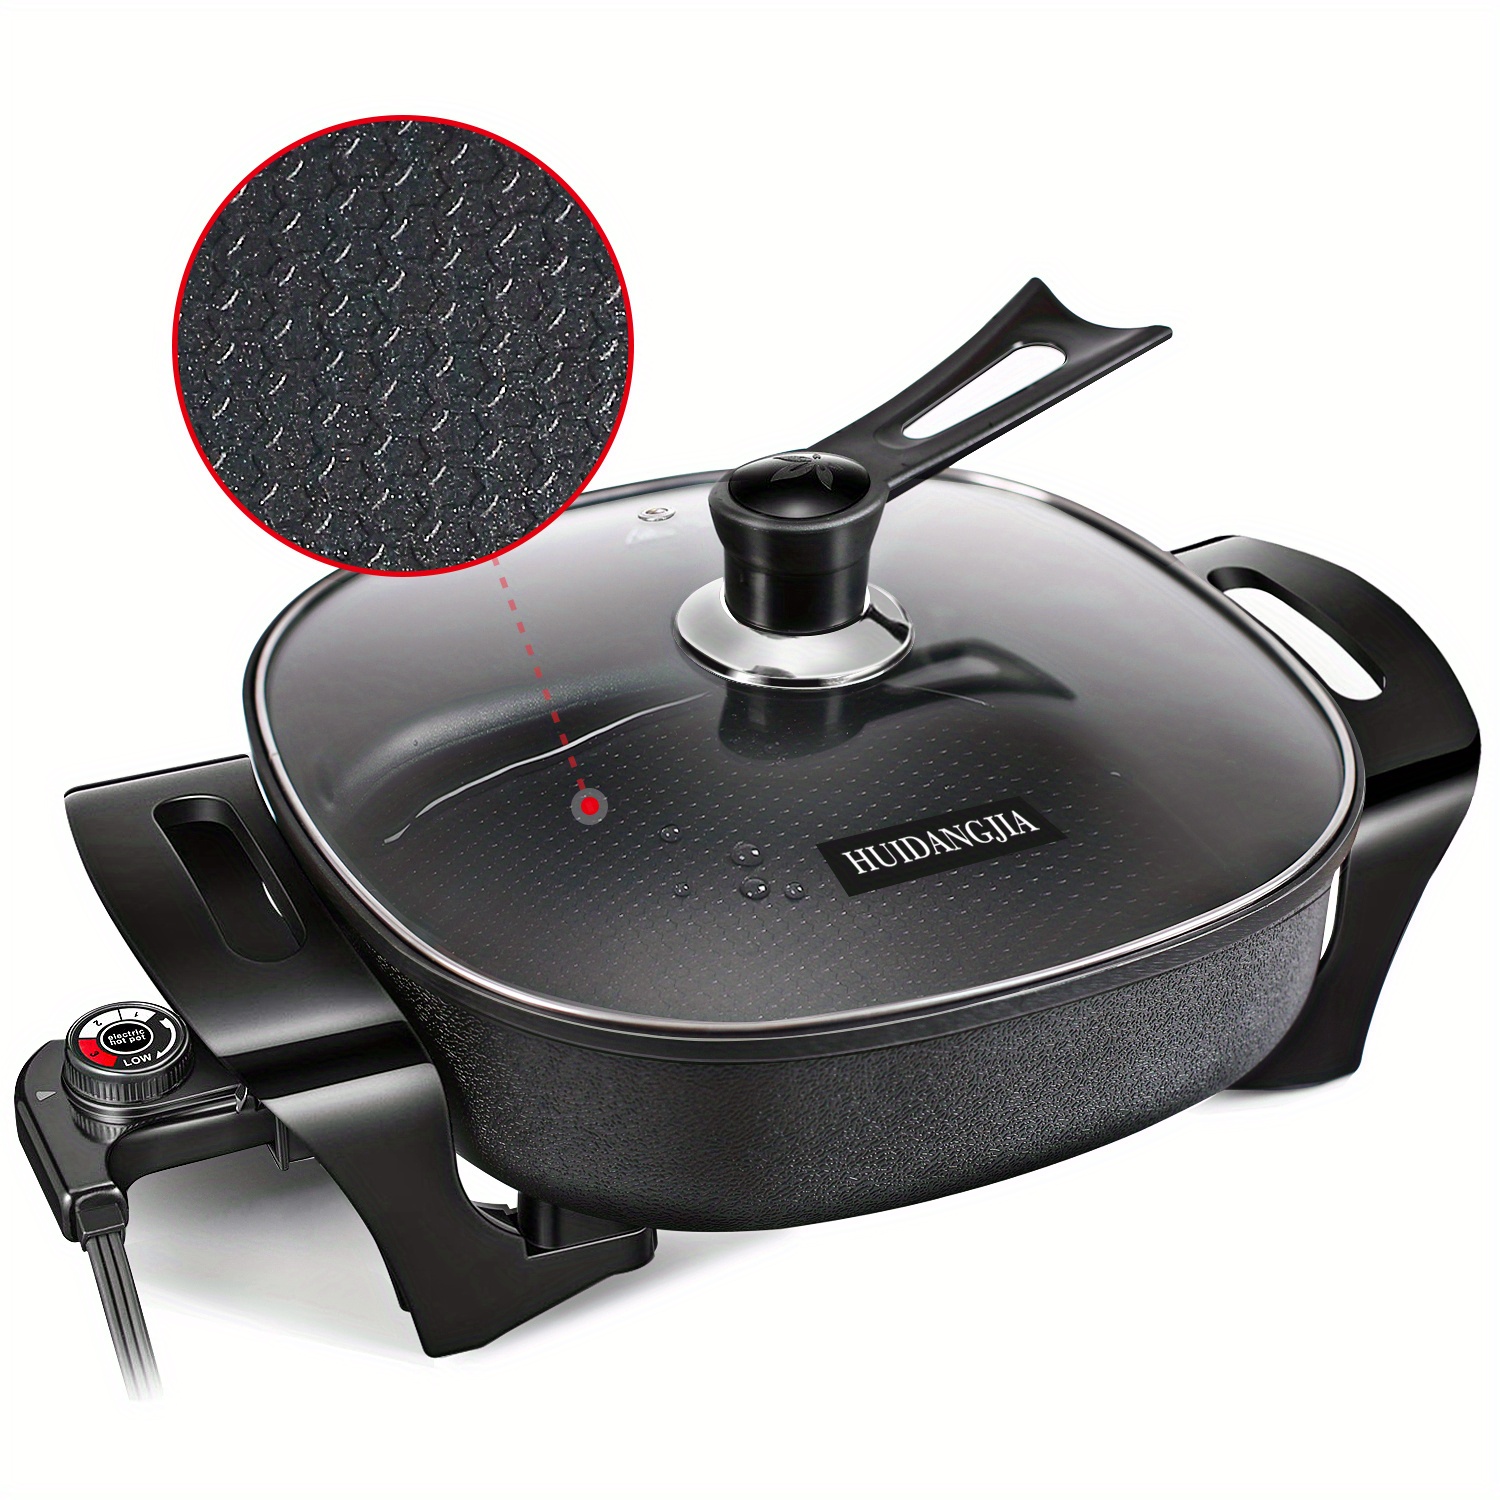 Large Capacity Nonstick Electric Skillet - Serves 4 to 6 People (16 inch)